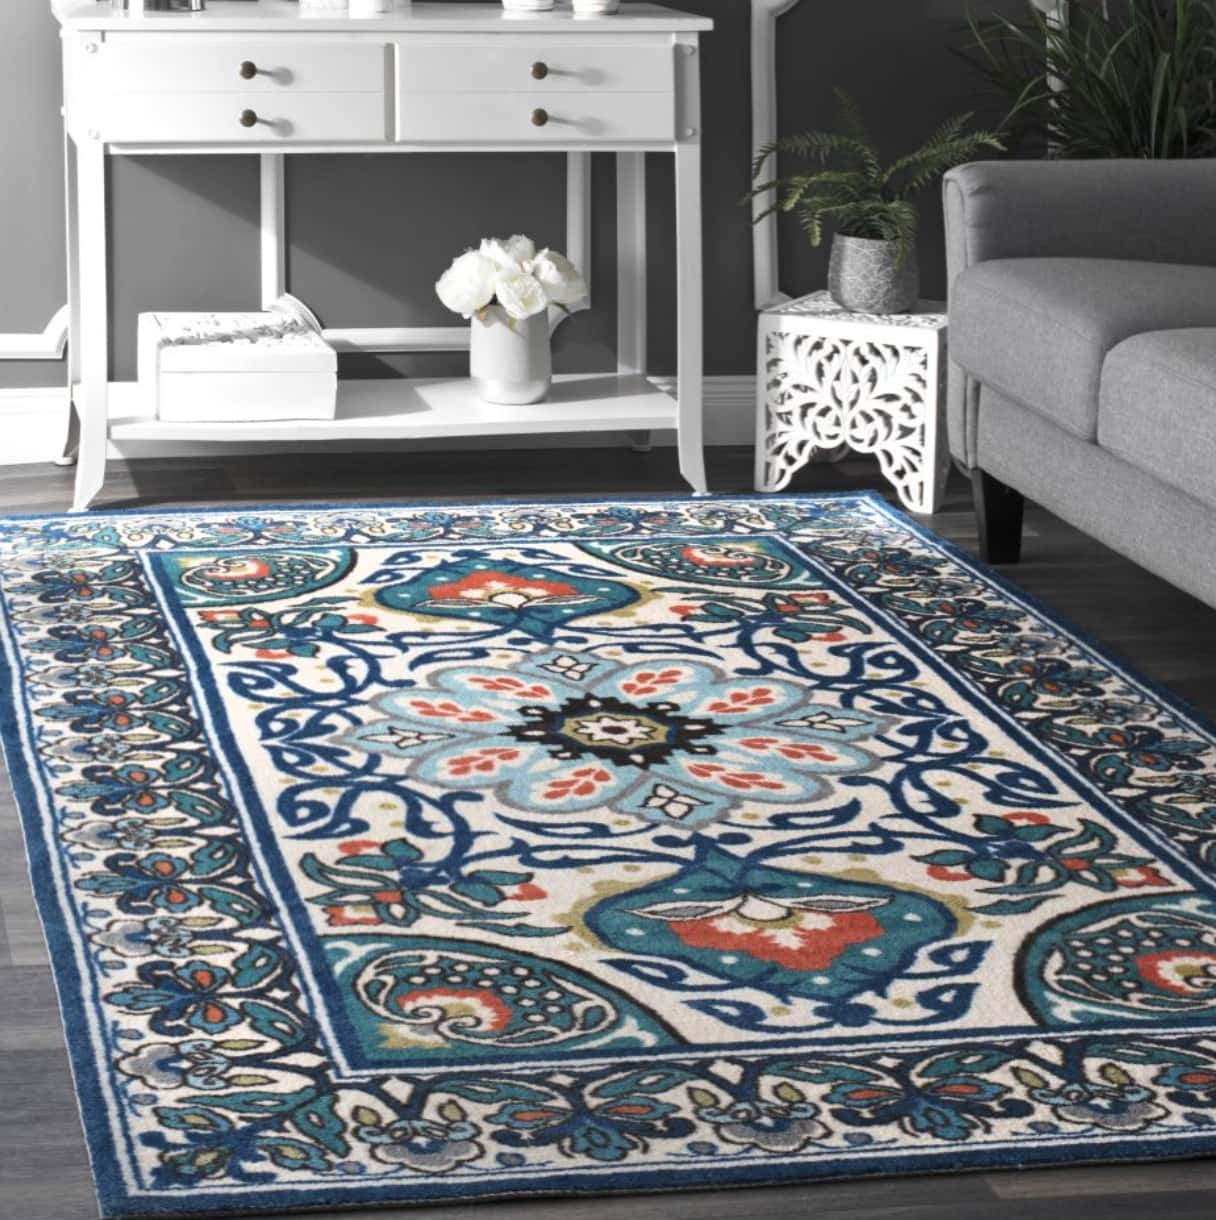 25 Gorgeous Rugs That Go With Grey Couches, Blue Grey And Red Area Rugs